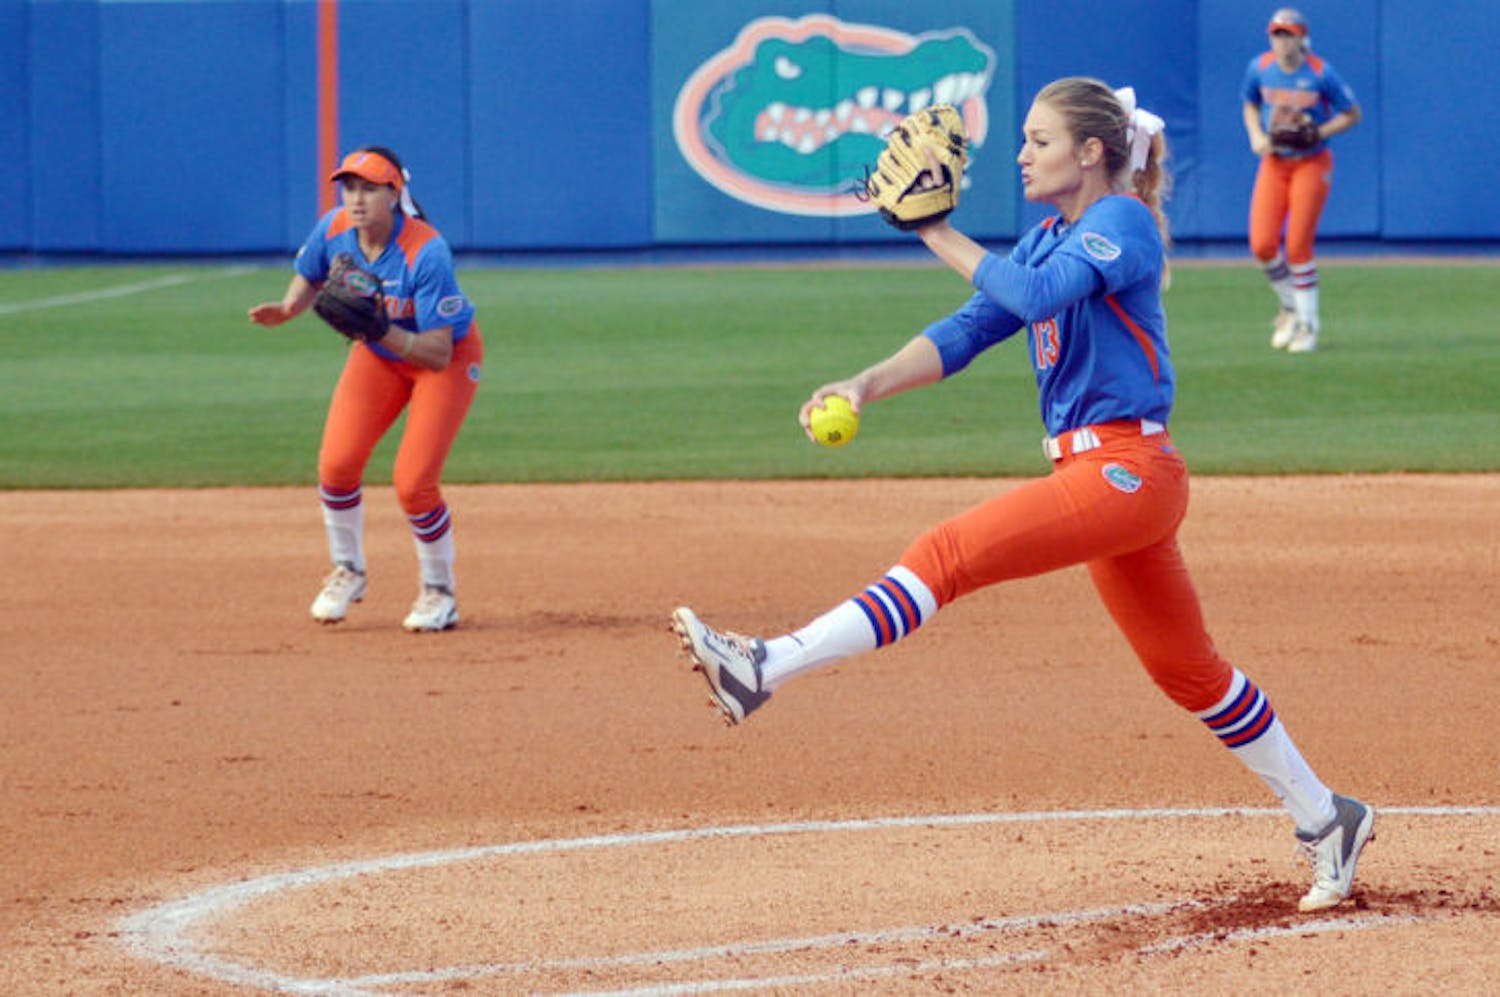 Hannah Rogers pitches during Florida’s 8-0 win against Indiana on Feb. 21 at Katie Seashole Pressly Stadium.